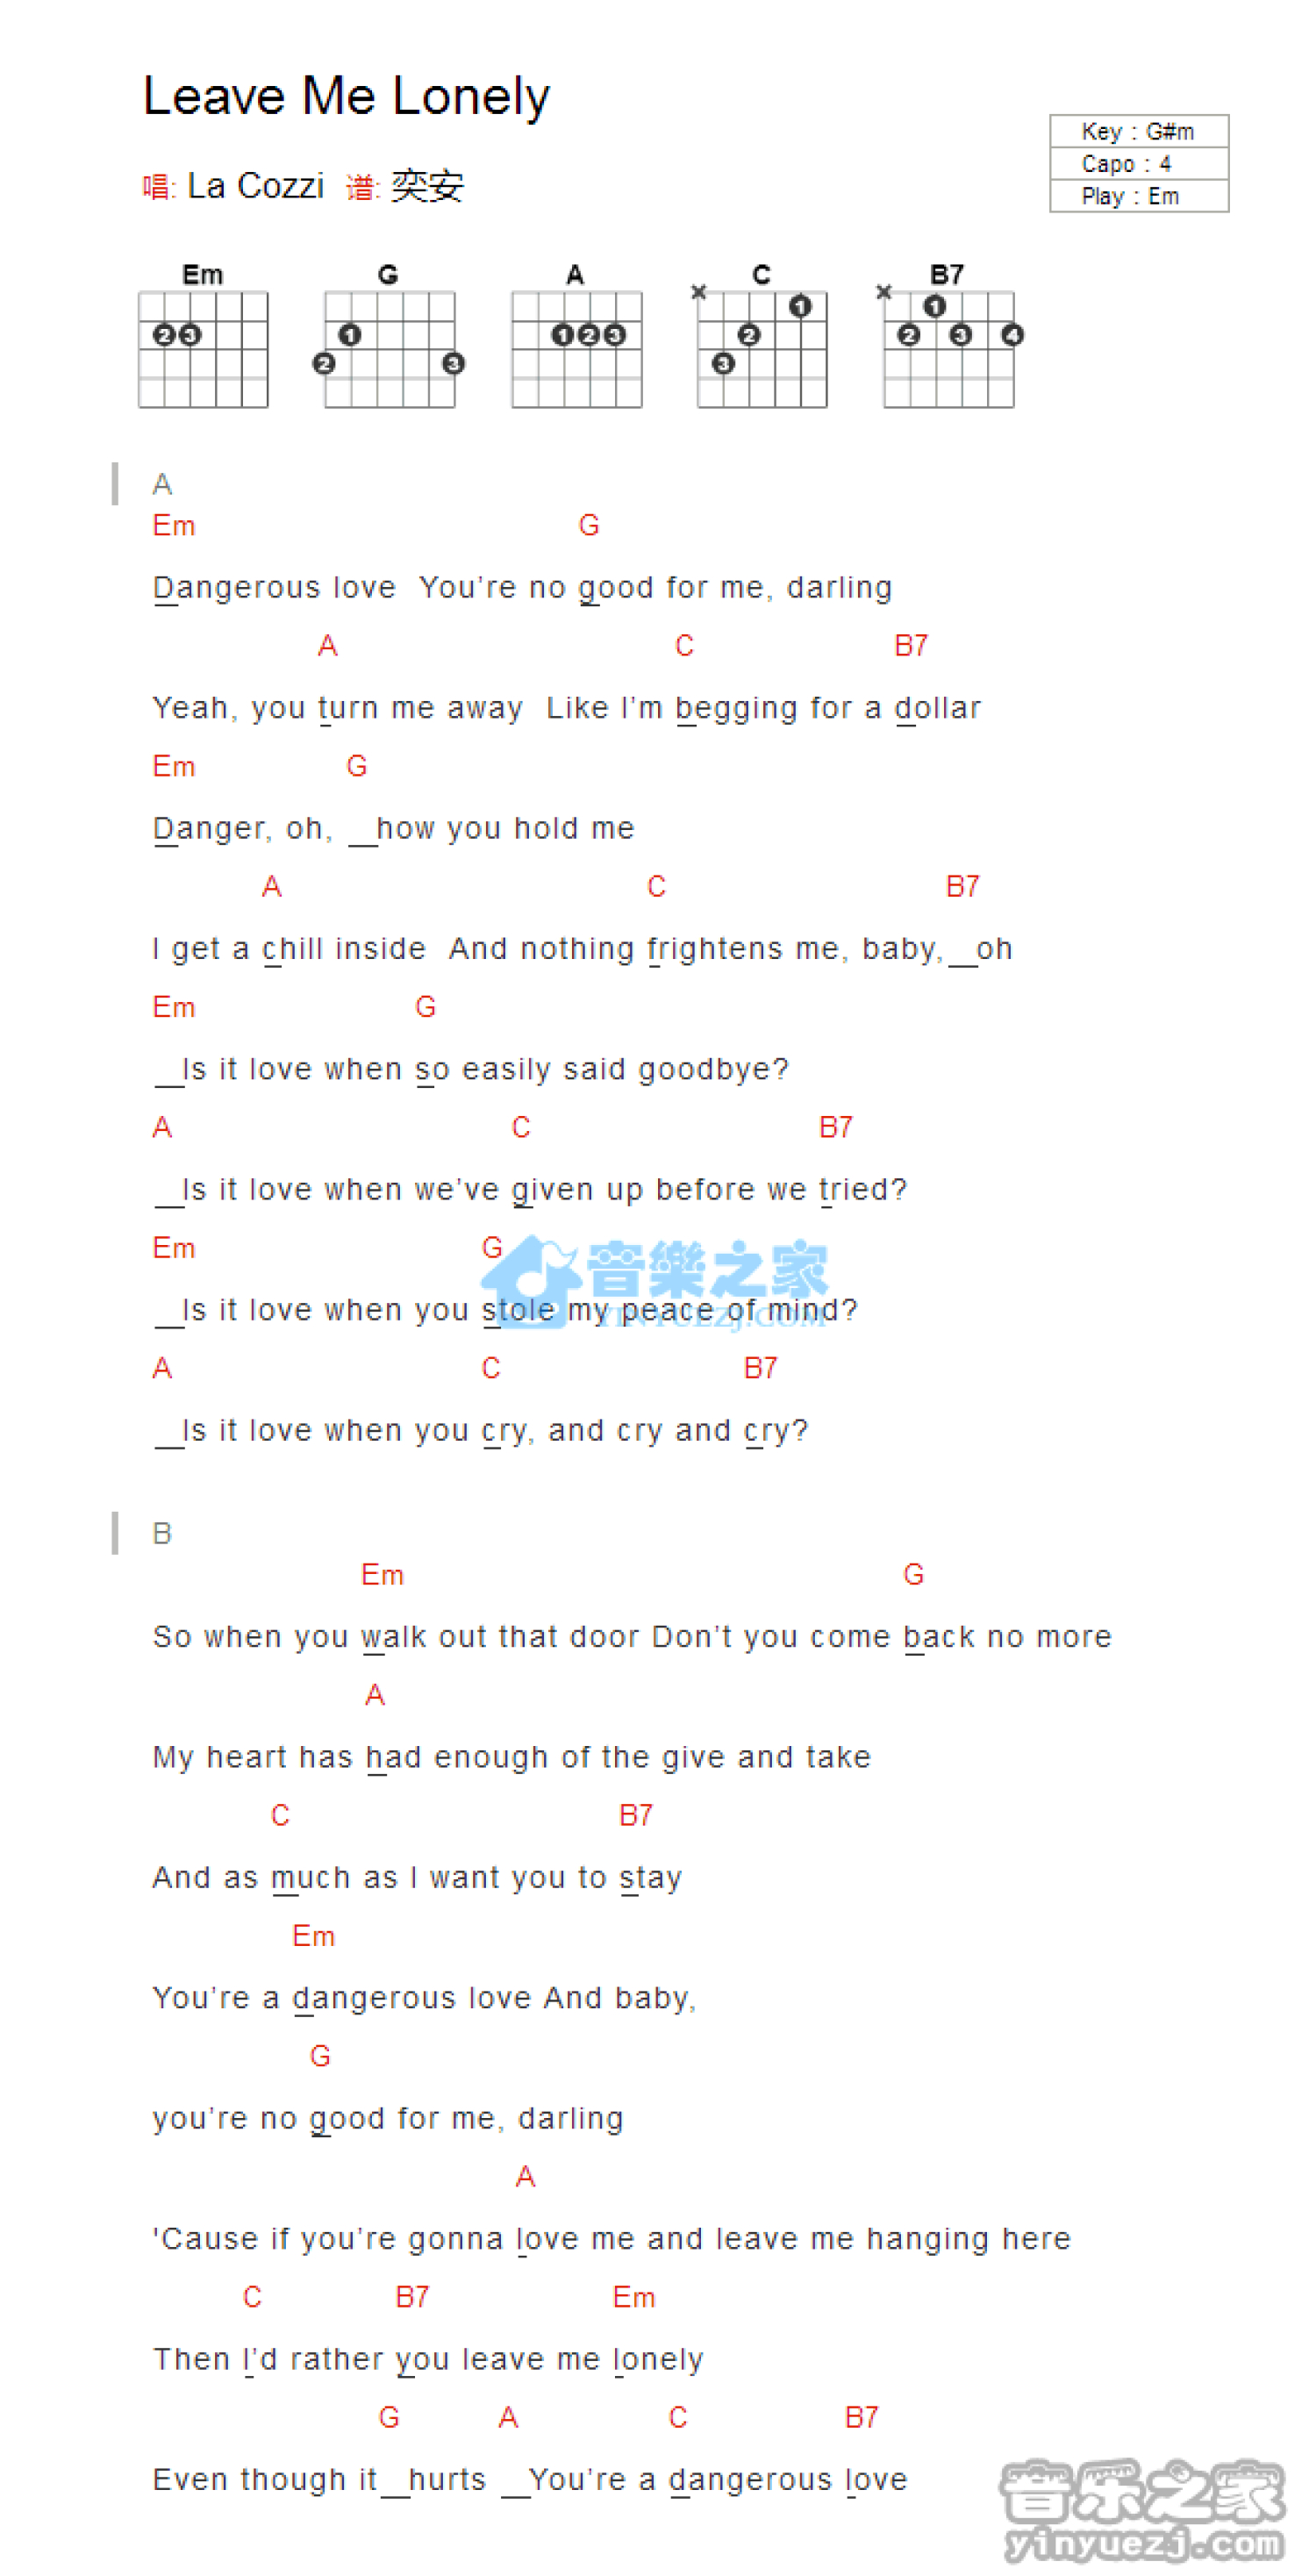 Show Me the Meaning of Being Lonely吉他谱_Backstreet Boys_G调弹唱77%专辑版 - 吉他世界